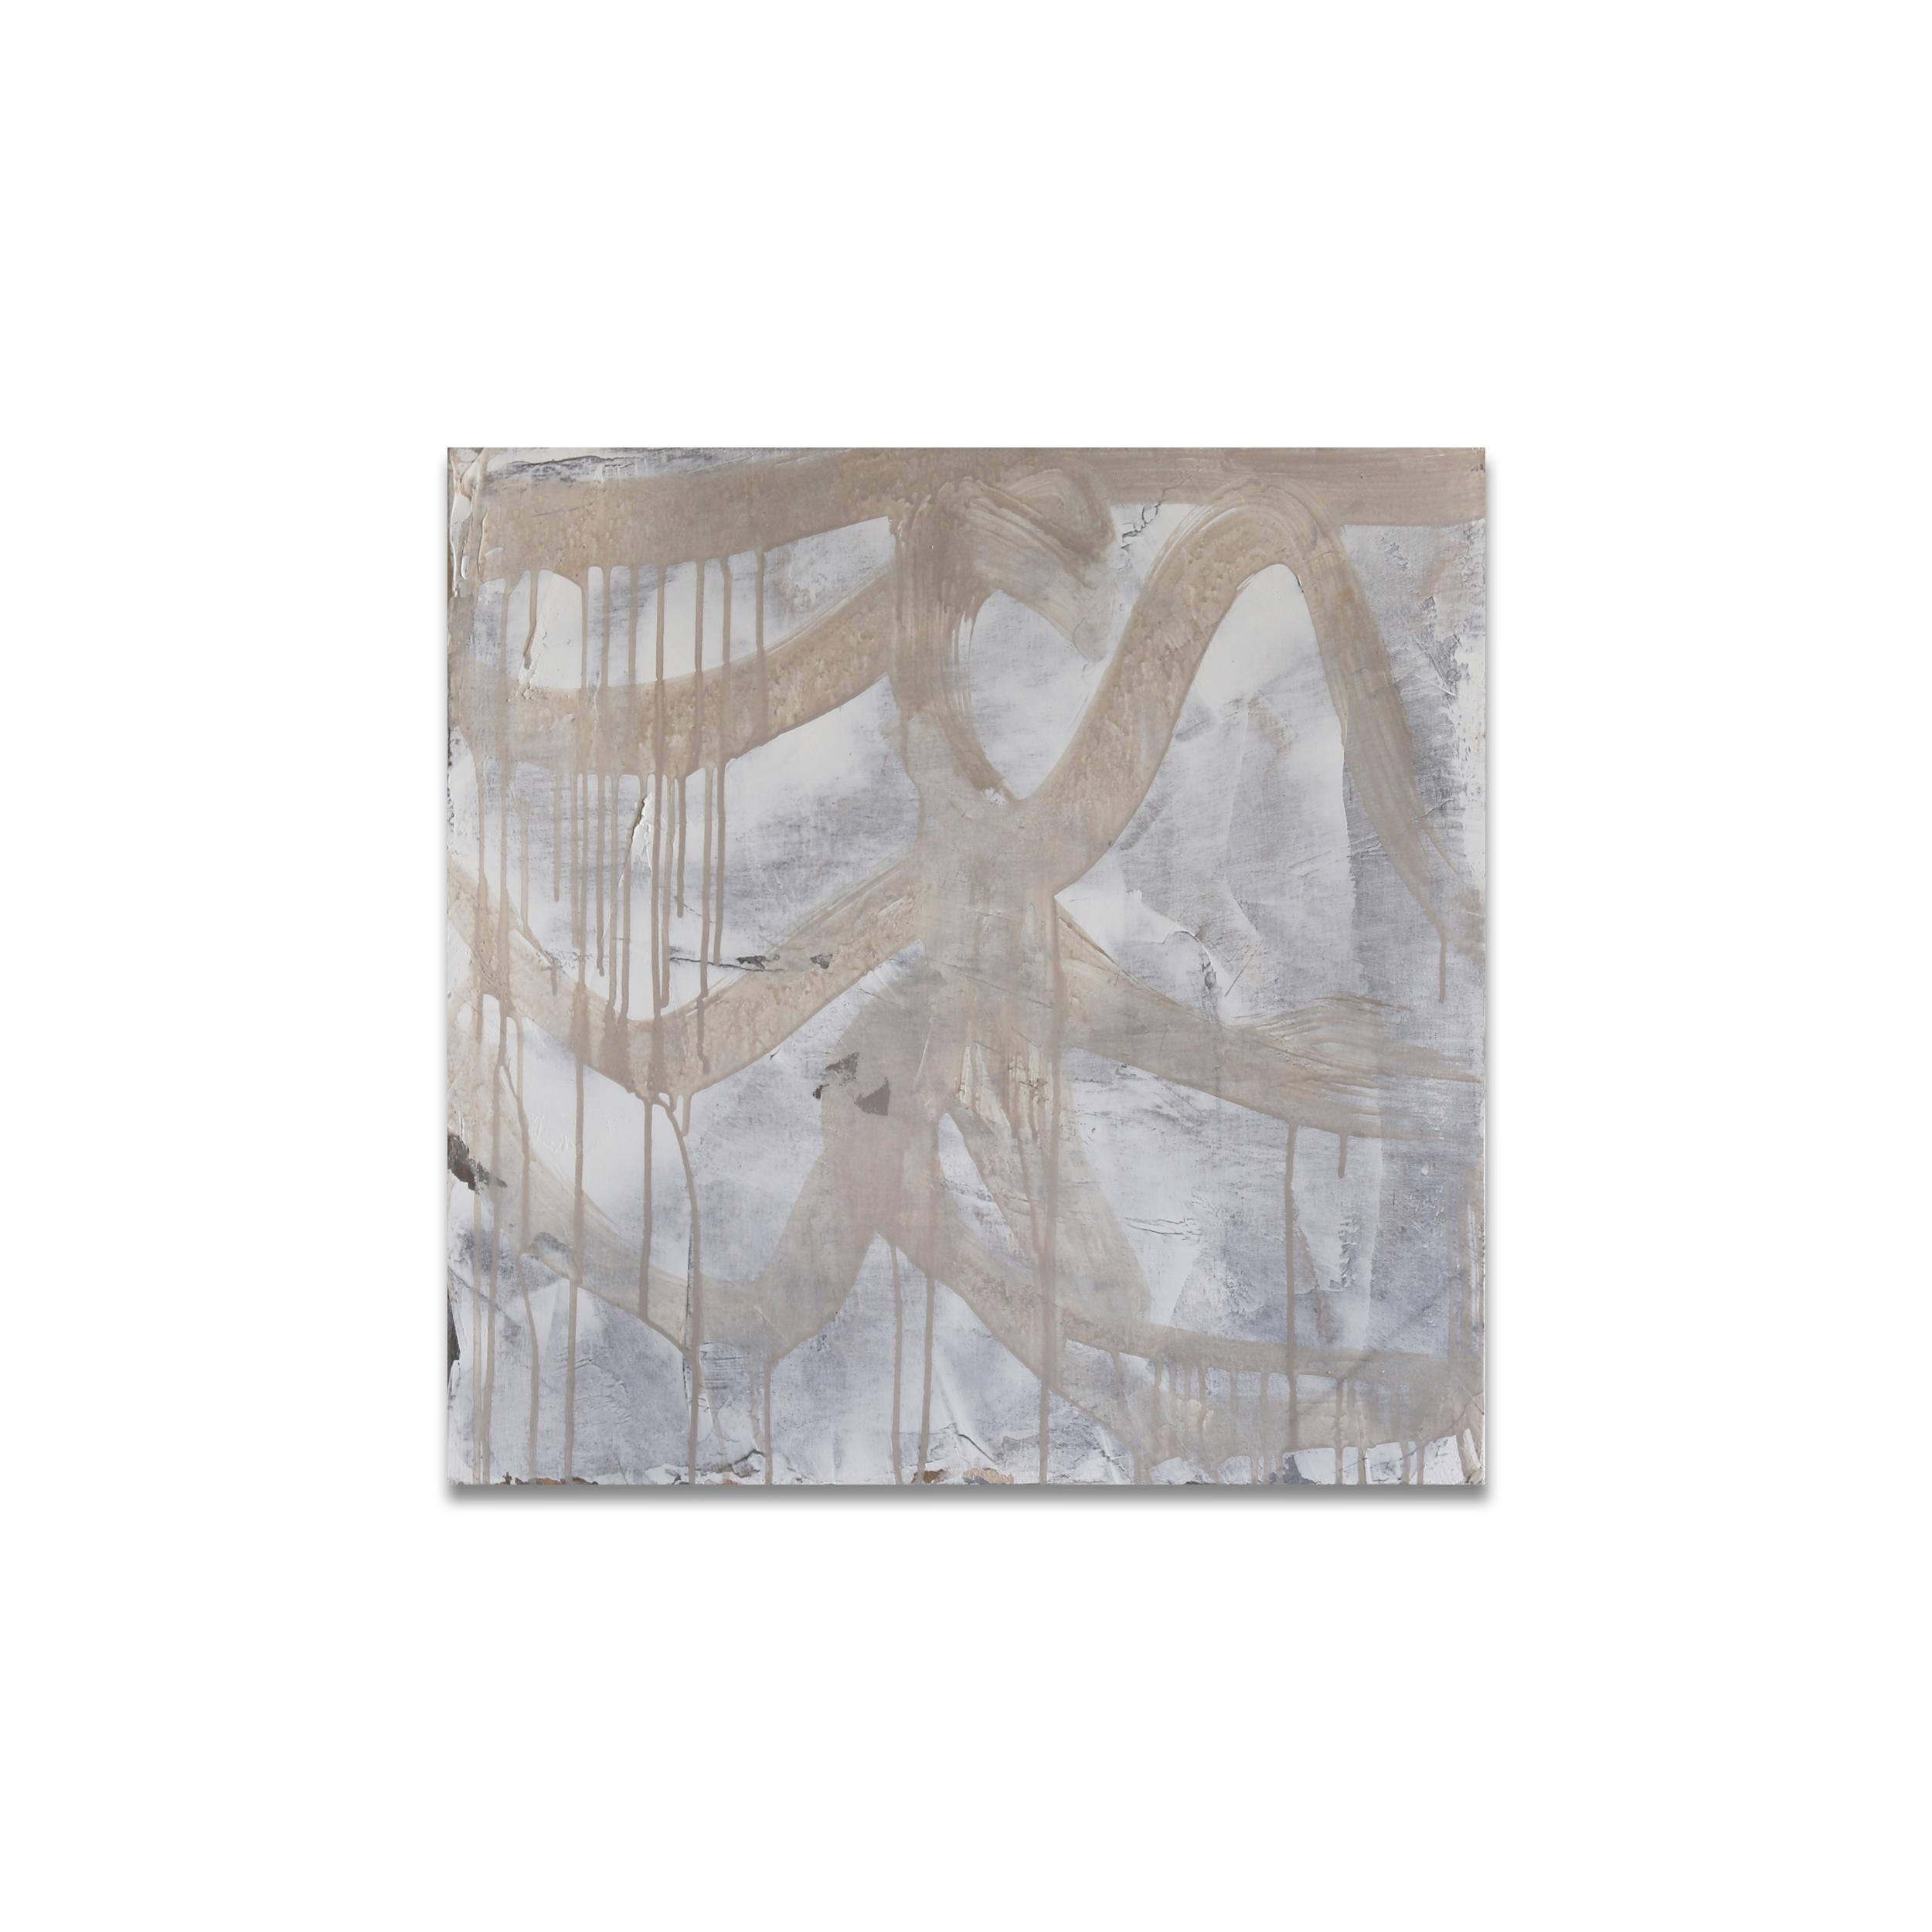 Kim Fonder
ETNOGRAFICA BLANC XXIIA
Mixed Media on Canvas
20.00 X 20.00 in
$1,000.00

Kim Fonder loves texture and touch. Her paintings and furniture reflect her infatuation with these two characteristics. From the materials Fonder selects, to the